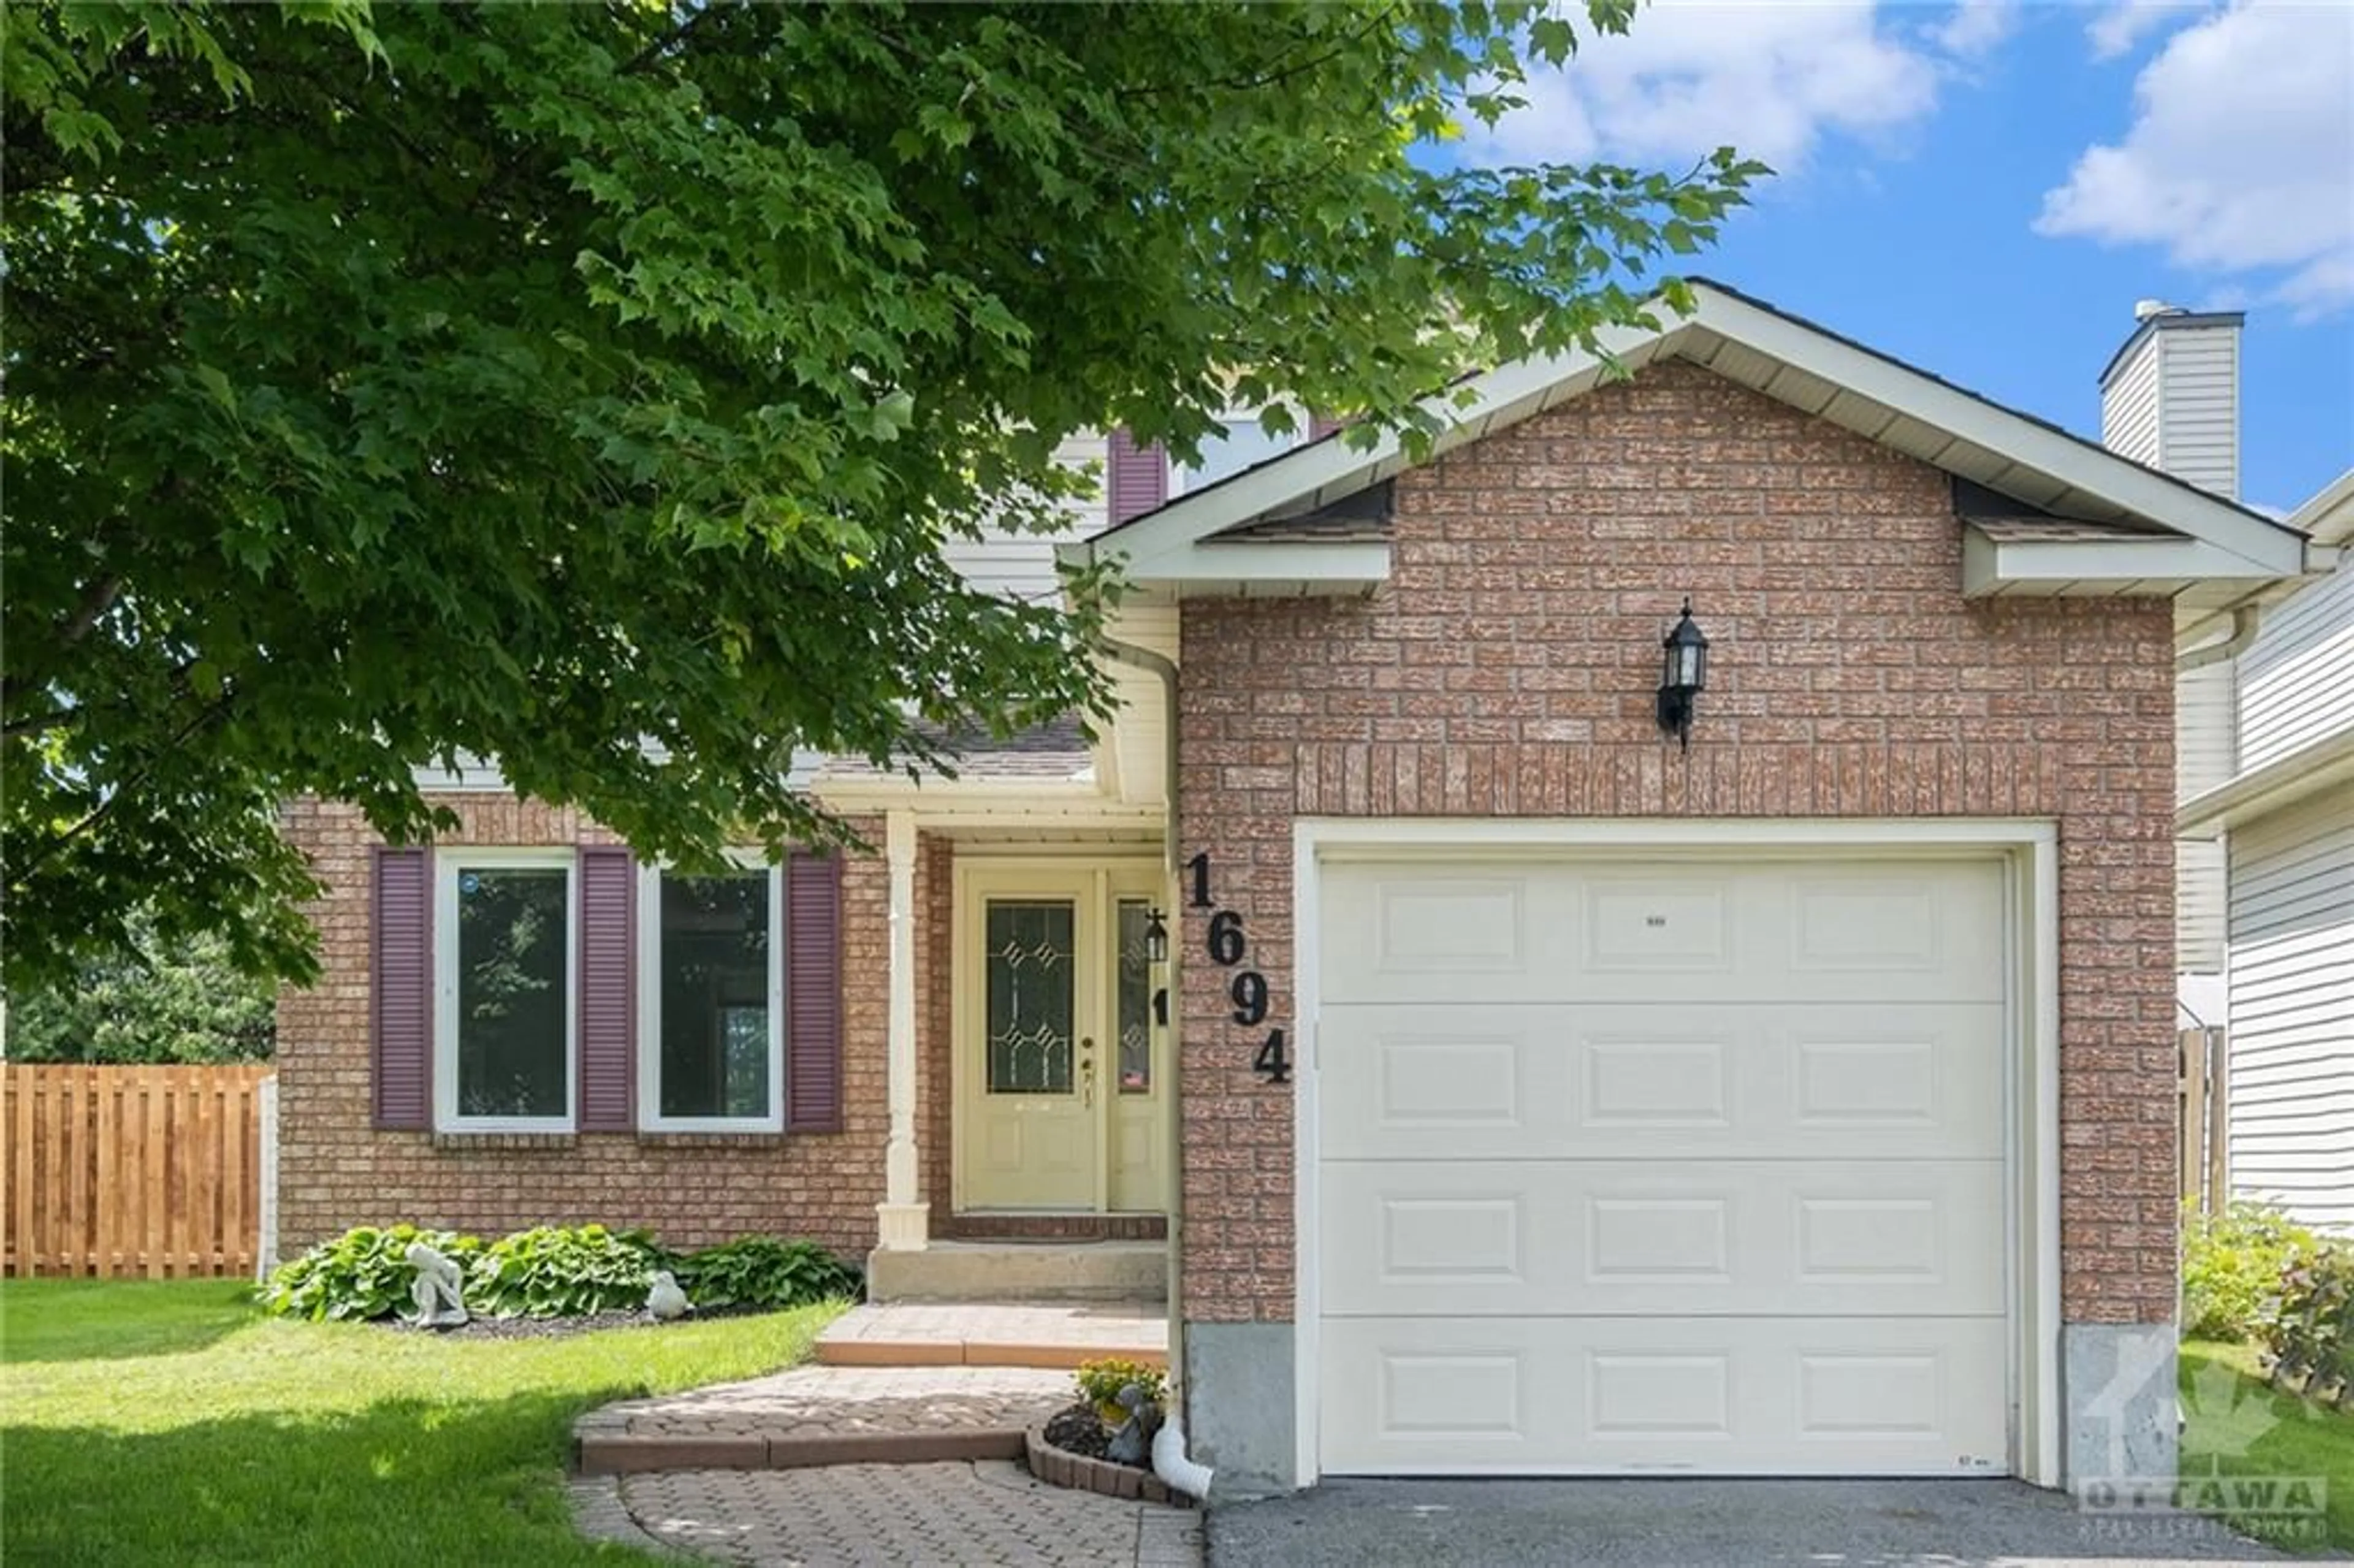 Home with brick exterior material for 1694 BOISBRIAND Cres, Ottawa Ontario K1C 4T9